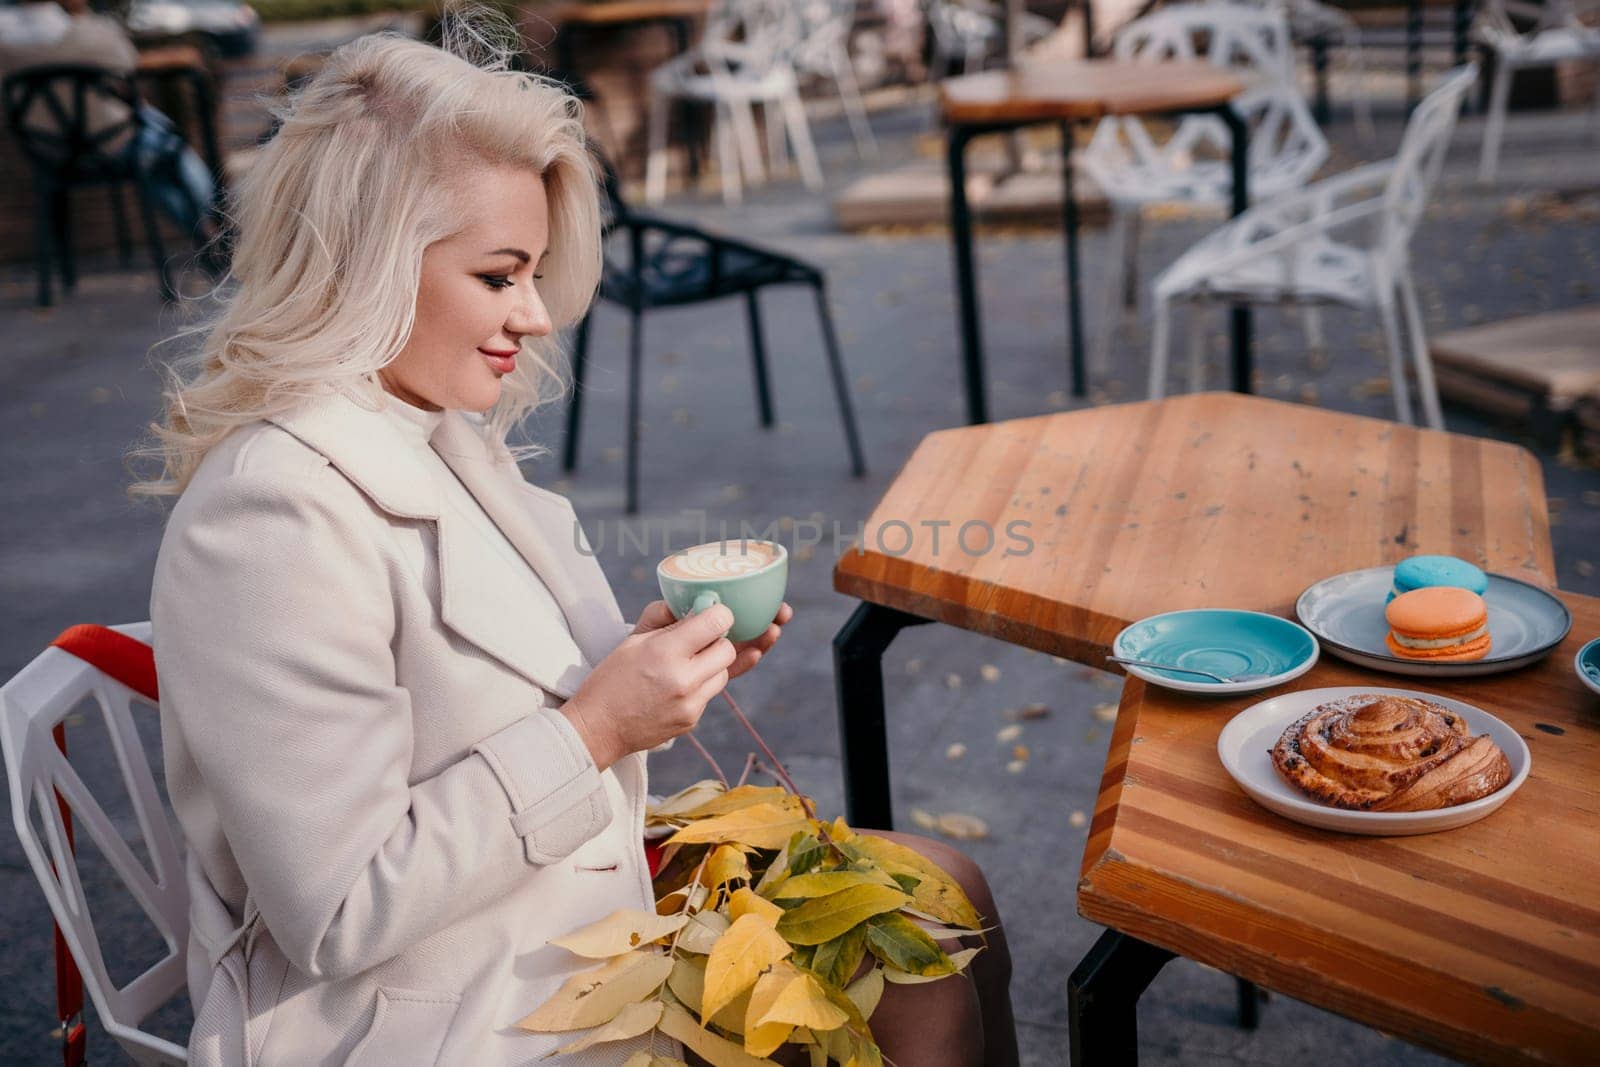 A woman is sitting at a table with a pastry and a cup of coffee. She is wearing a white coat and has blonde hair